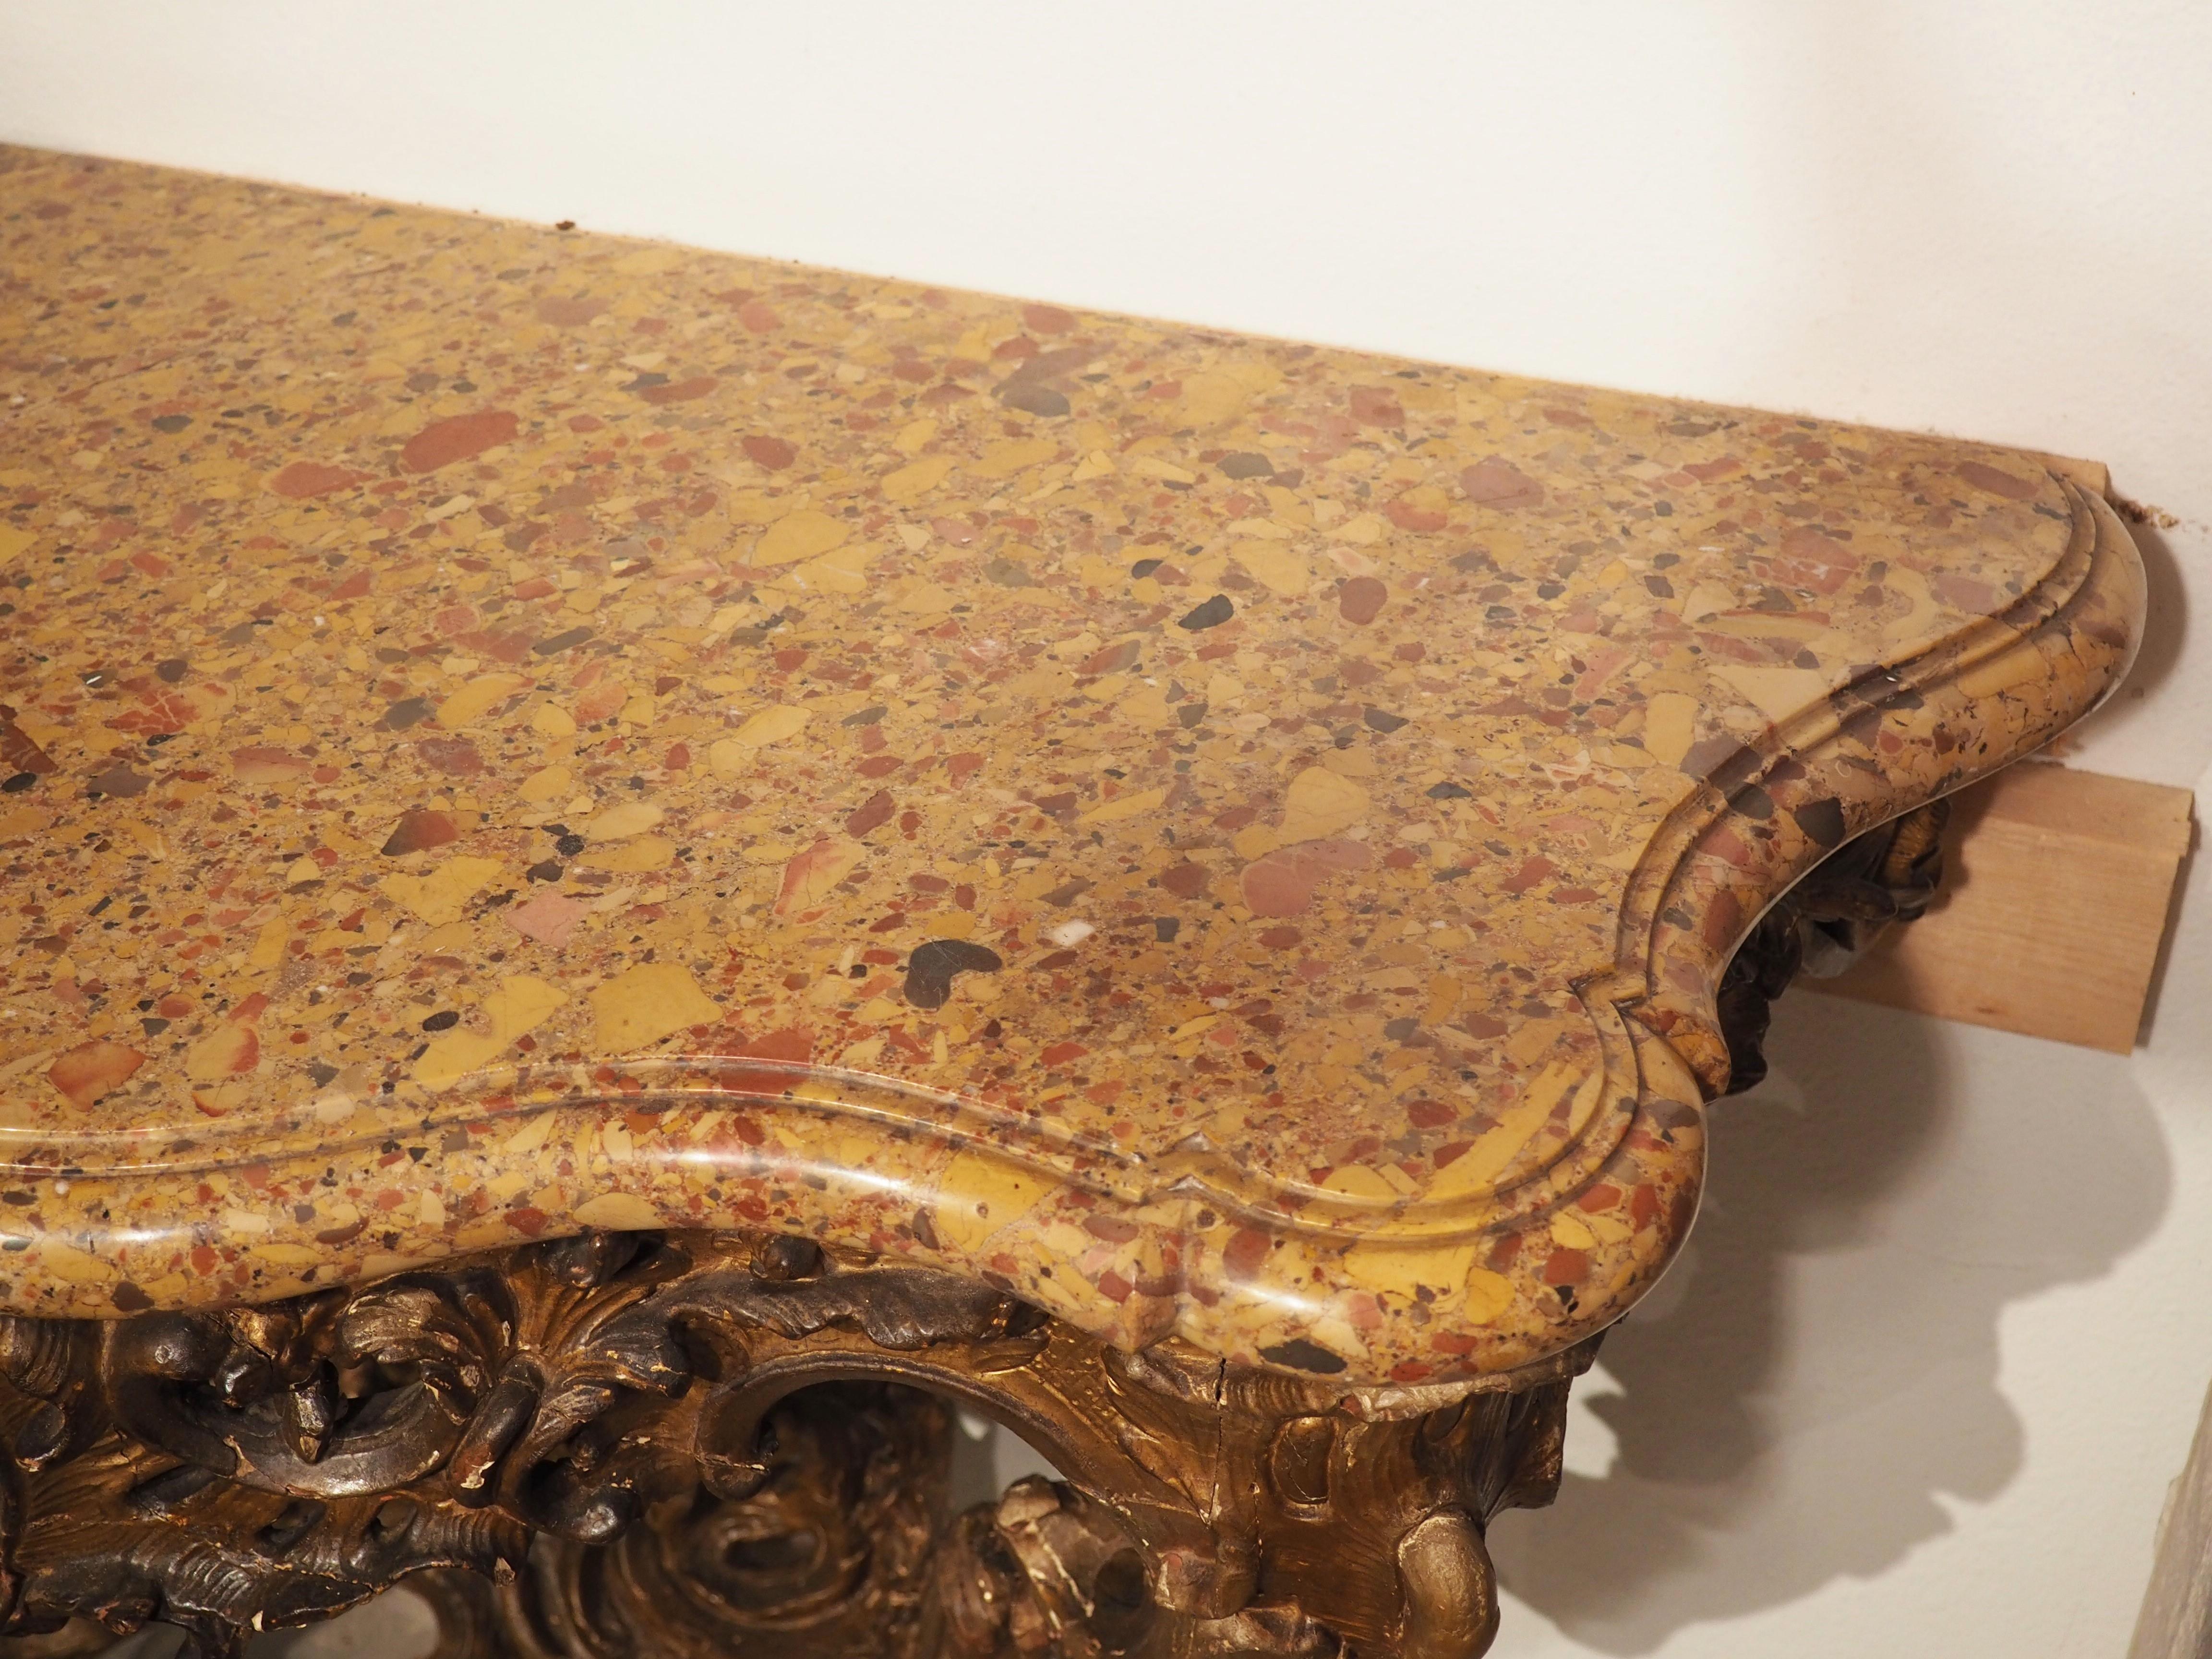 Furniture crafted in the onset of Louis XV was greatly influenced by the styles of the preceding periods. Between 1730 and 1750, menusiers, or French woodworkers, shifted to creating more extravagant items, with décor inspired by nature, known as